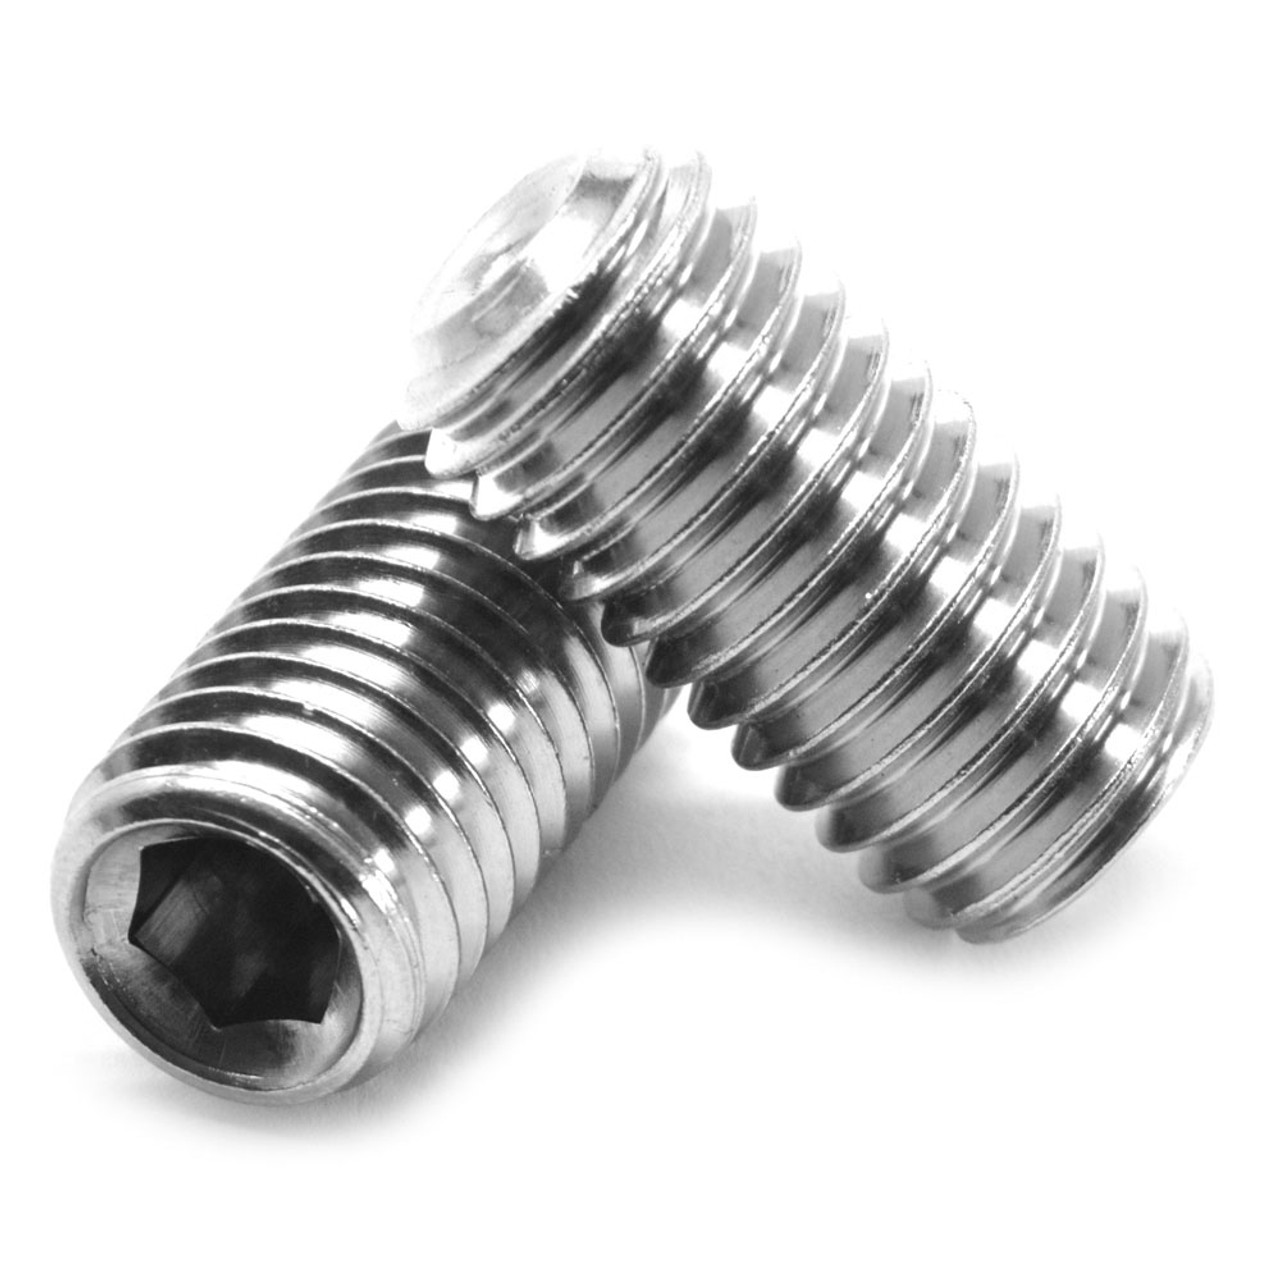 M10 x 1.50 x 20 MM Coarse Thread DIN 916 / ISO 4029 Socket Set Screw Cup Point Stainless Steel 316